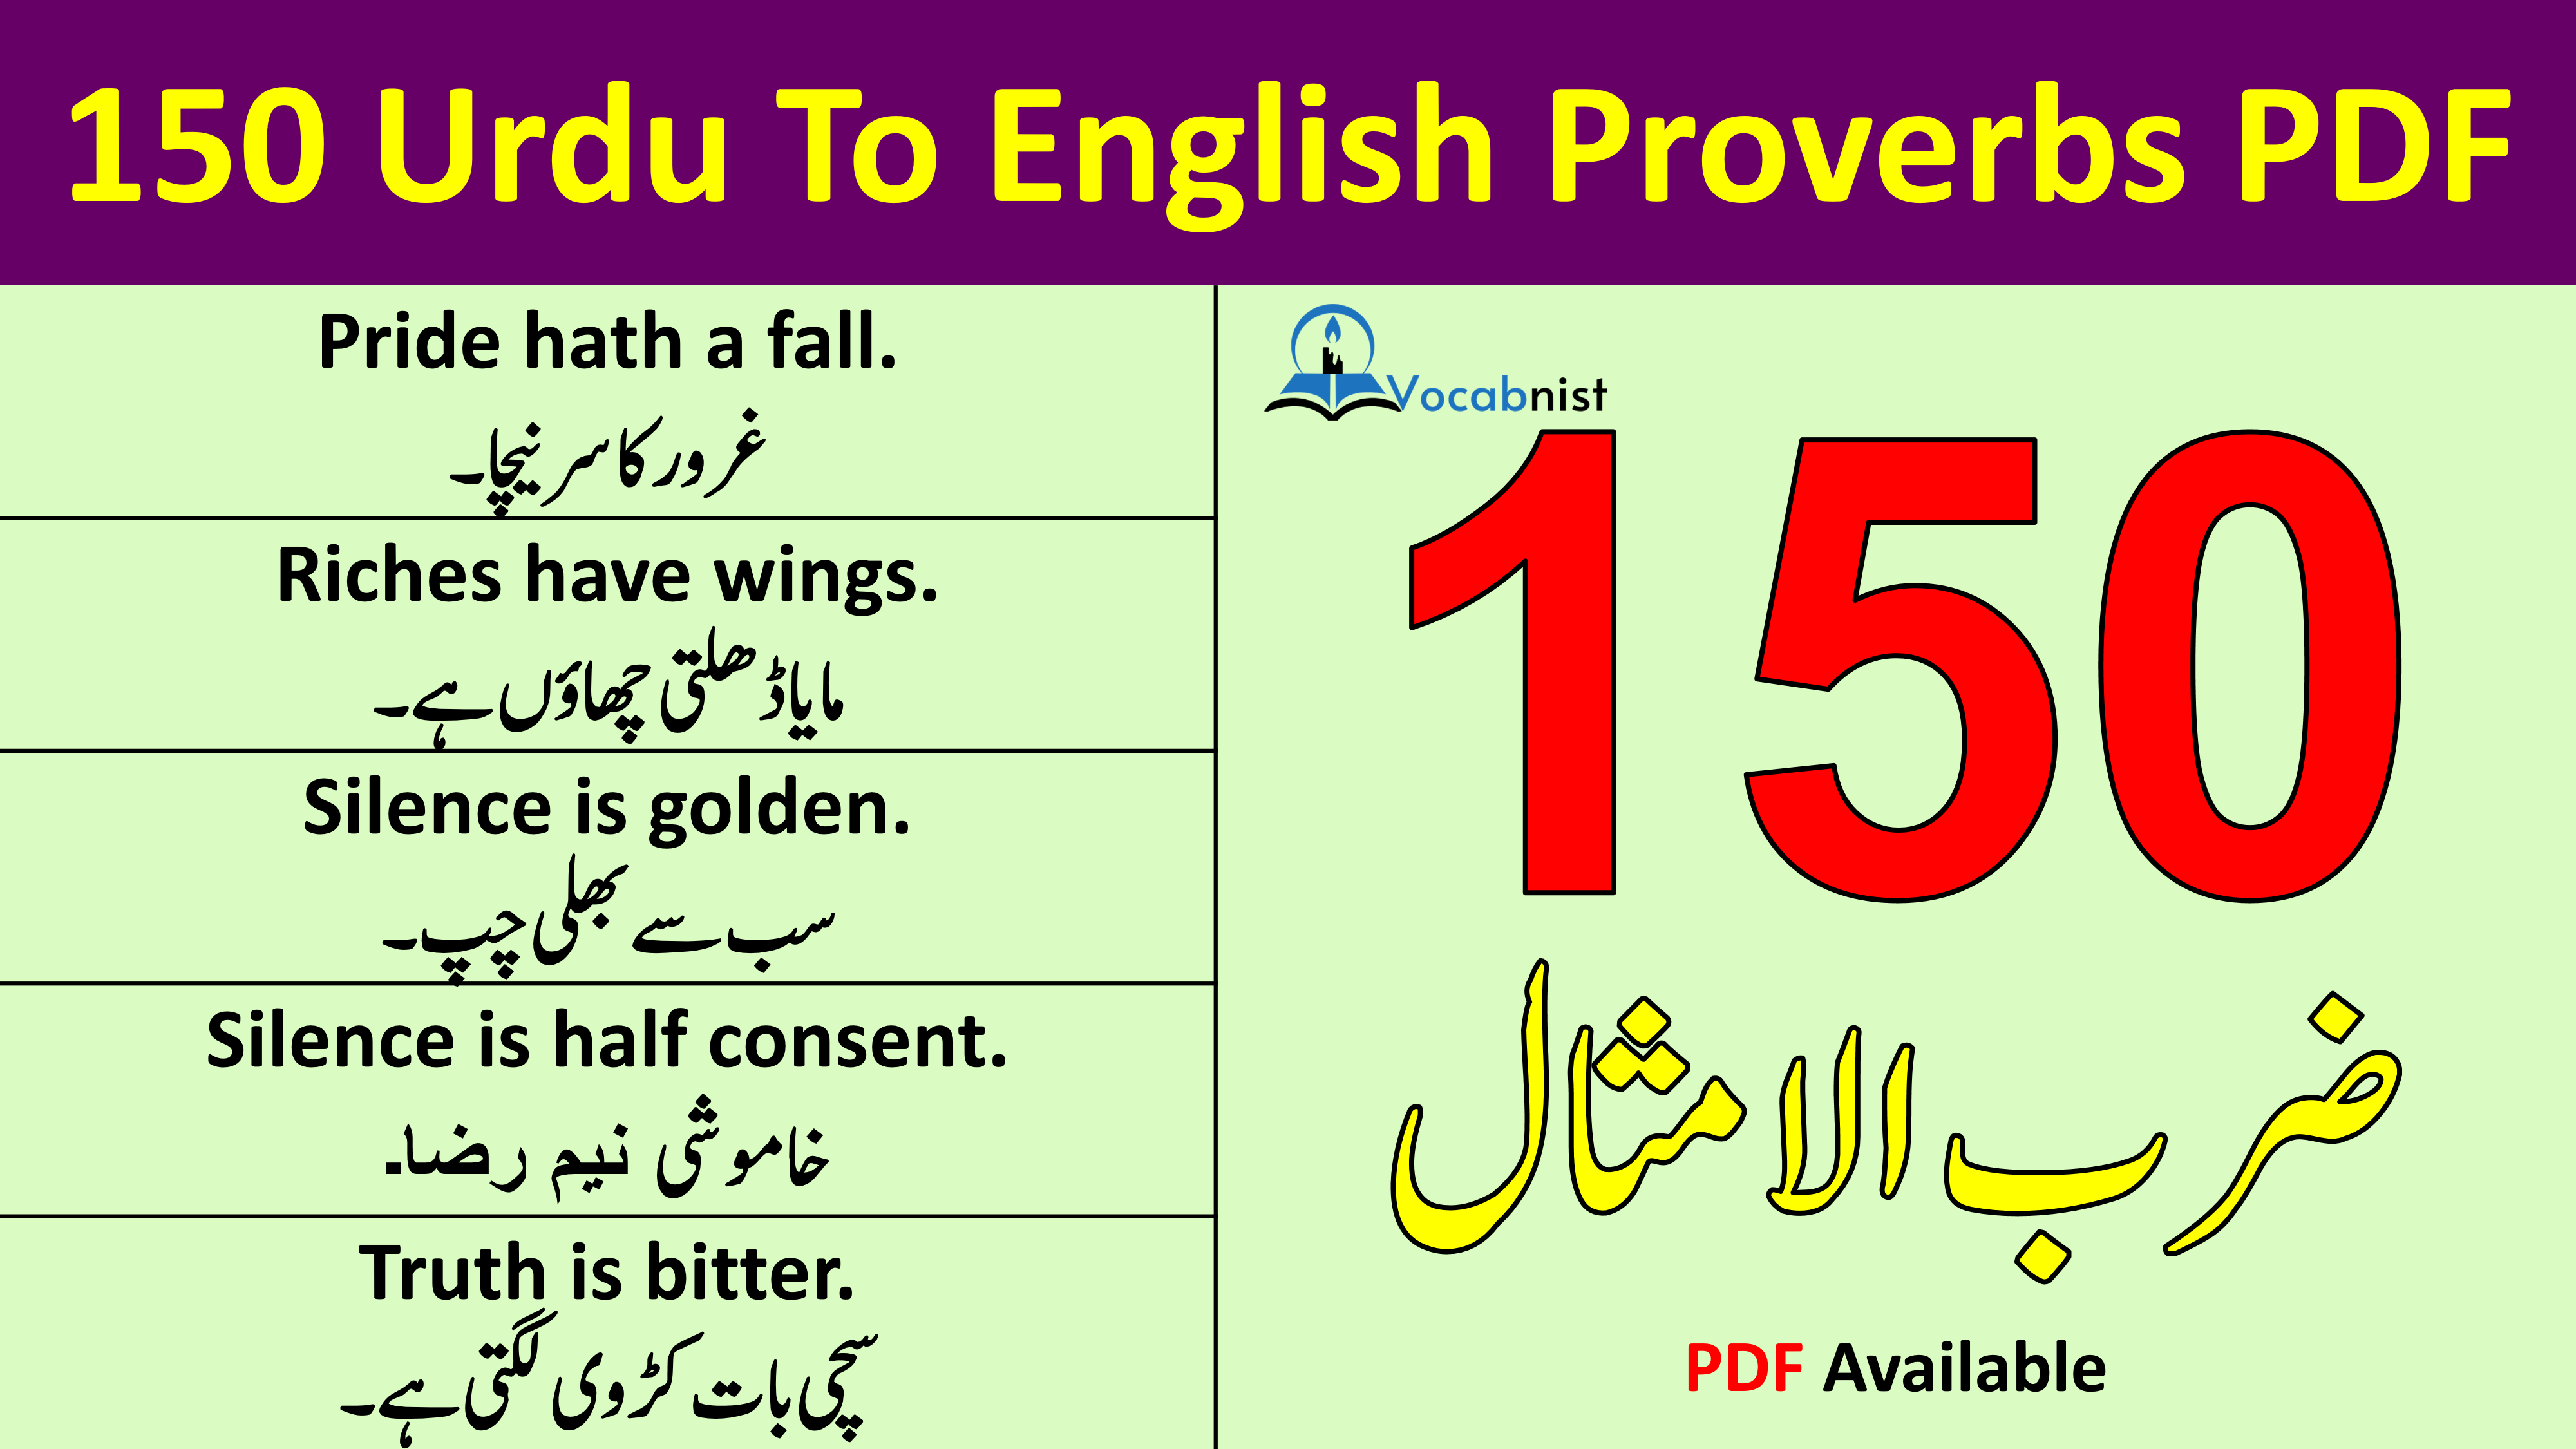 Commonly Used Proverbs in Urdu Hindi and English PDF